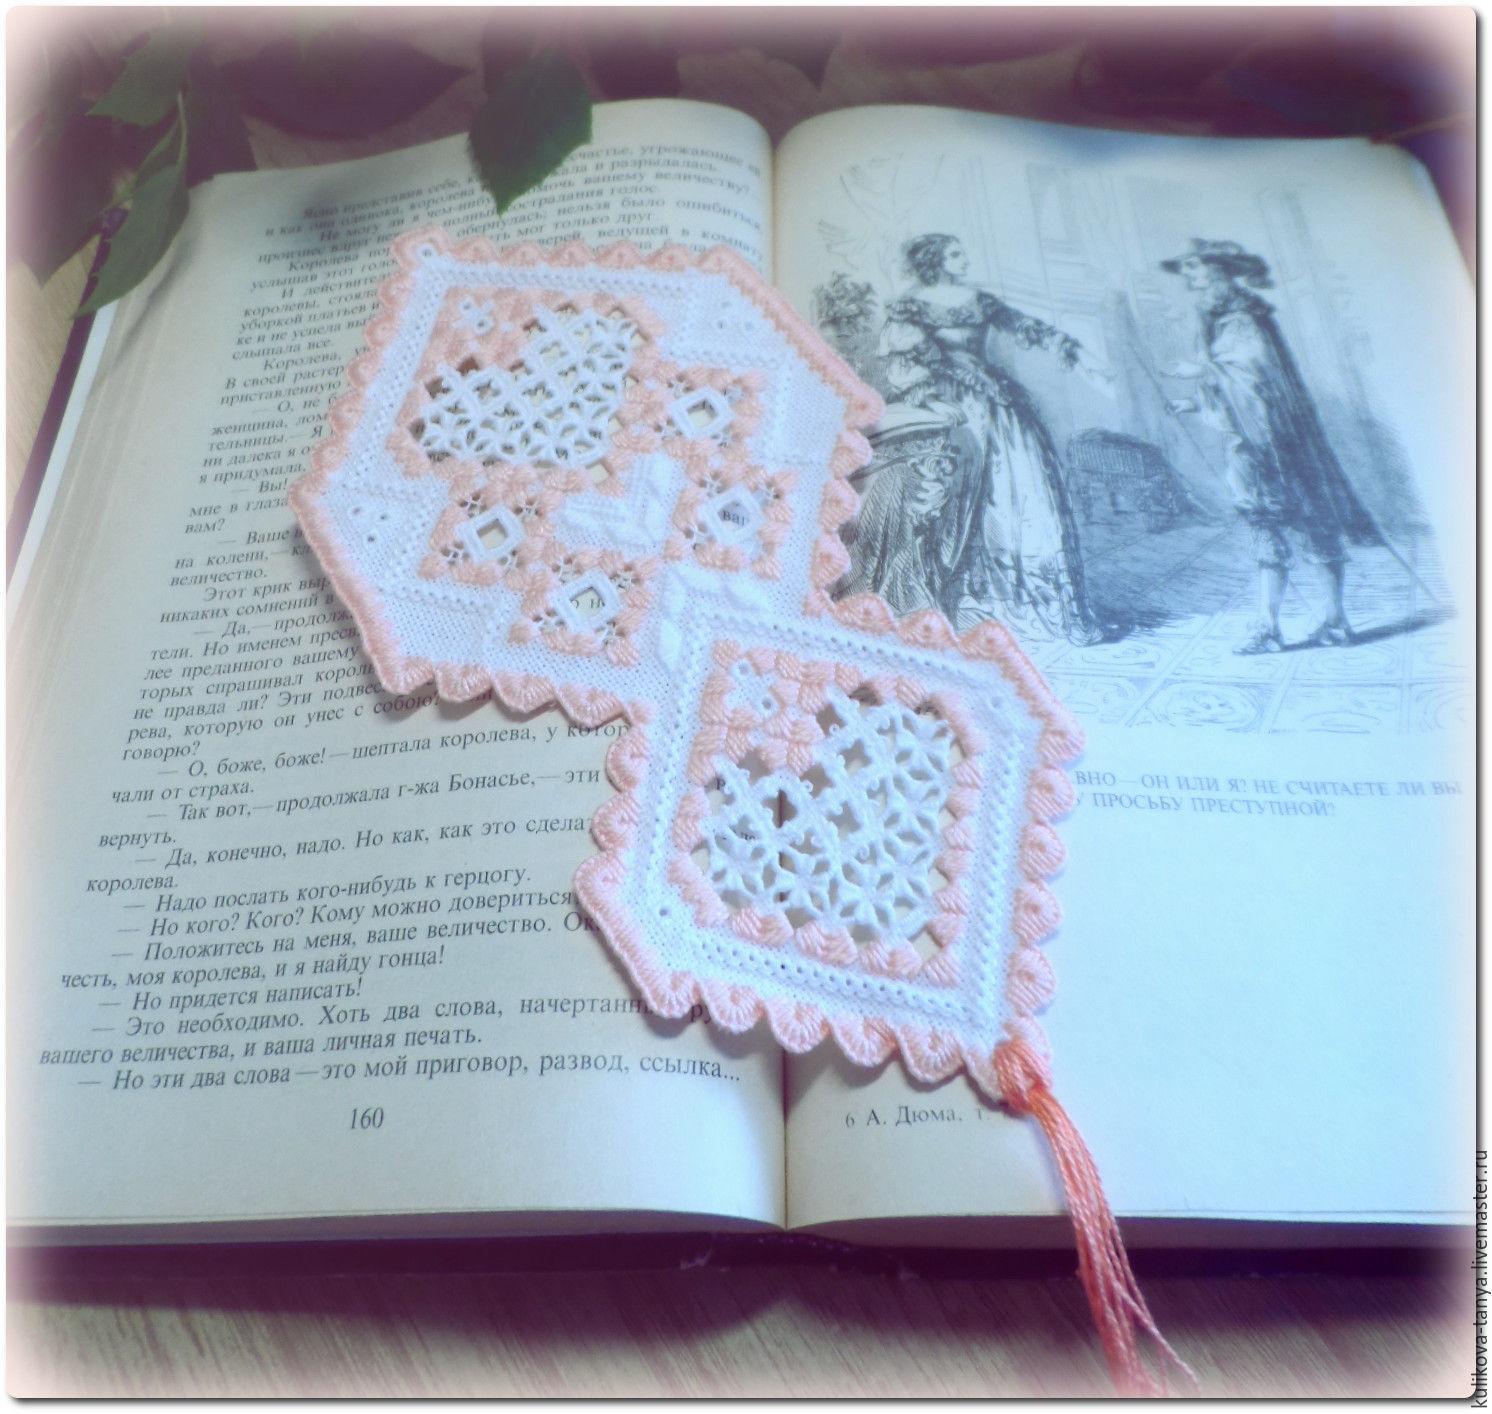 Hardanger Embroidery Patterns Online Free Bookmark For Books With Hand Embroidery A Romantic Gift Shop Online On Livemaster With Shipping 4fxidcom Izhevsk